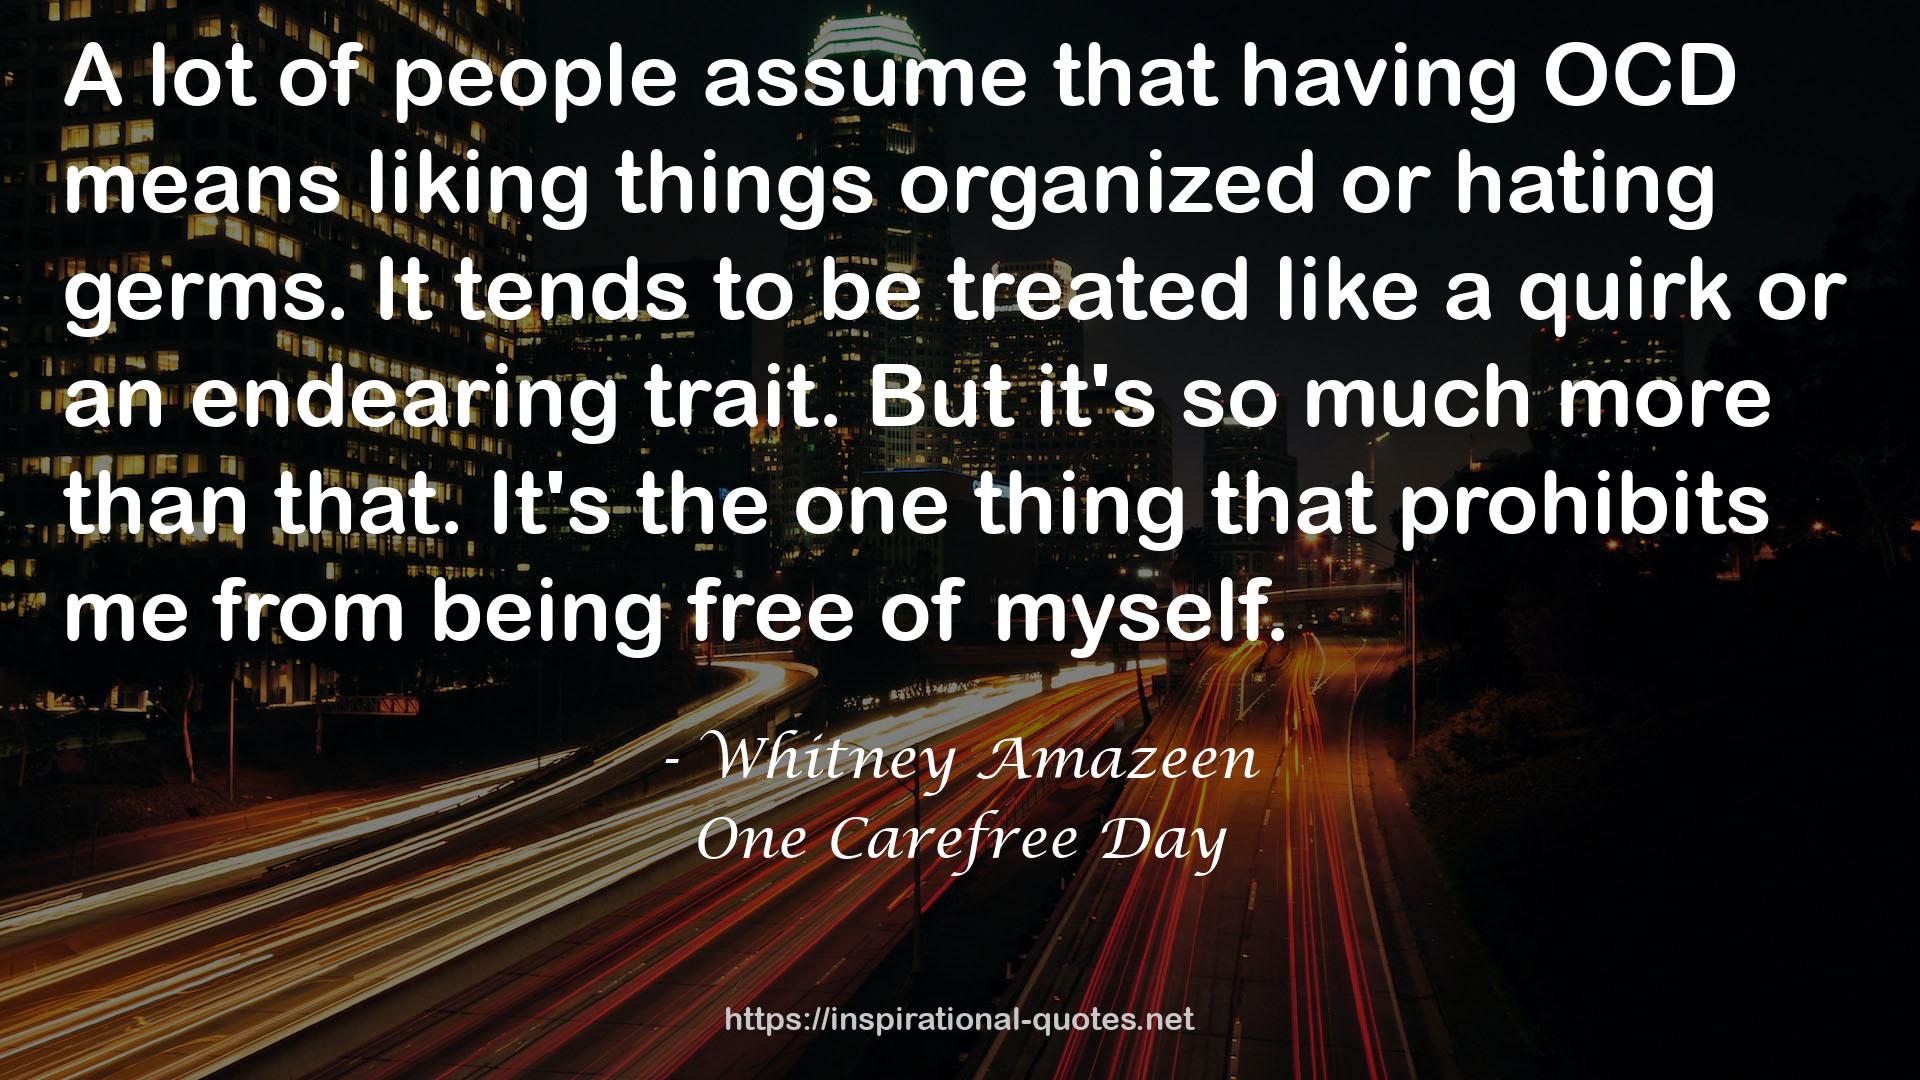 One Carefree Day QUOTES